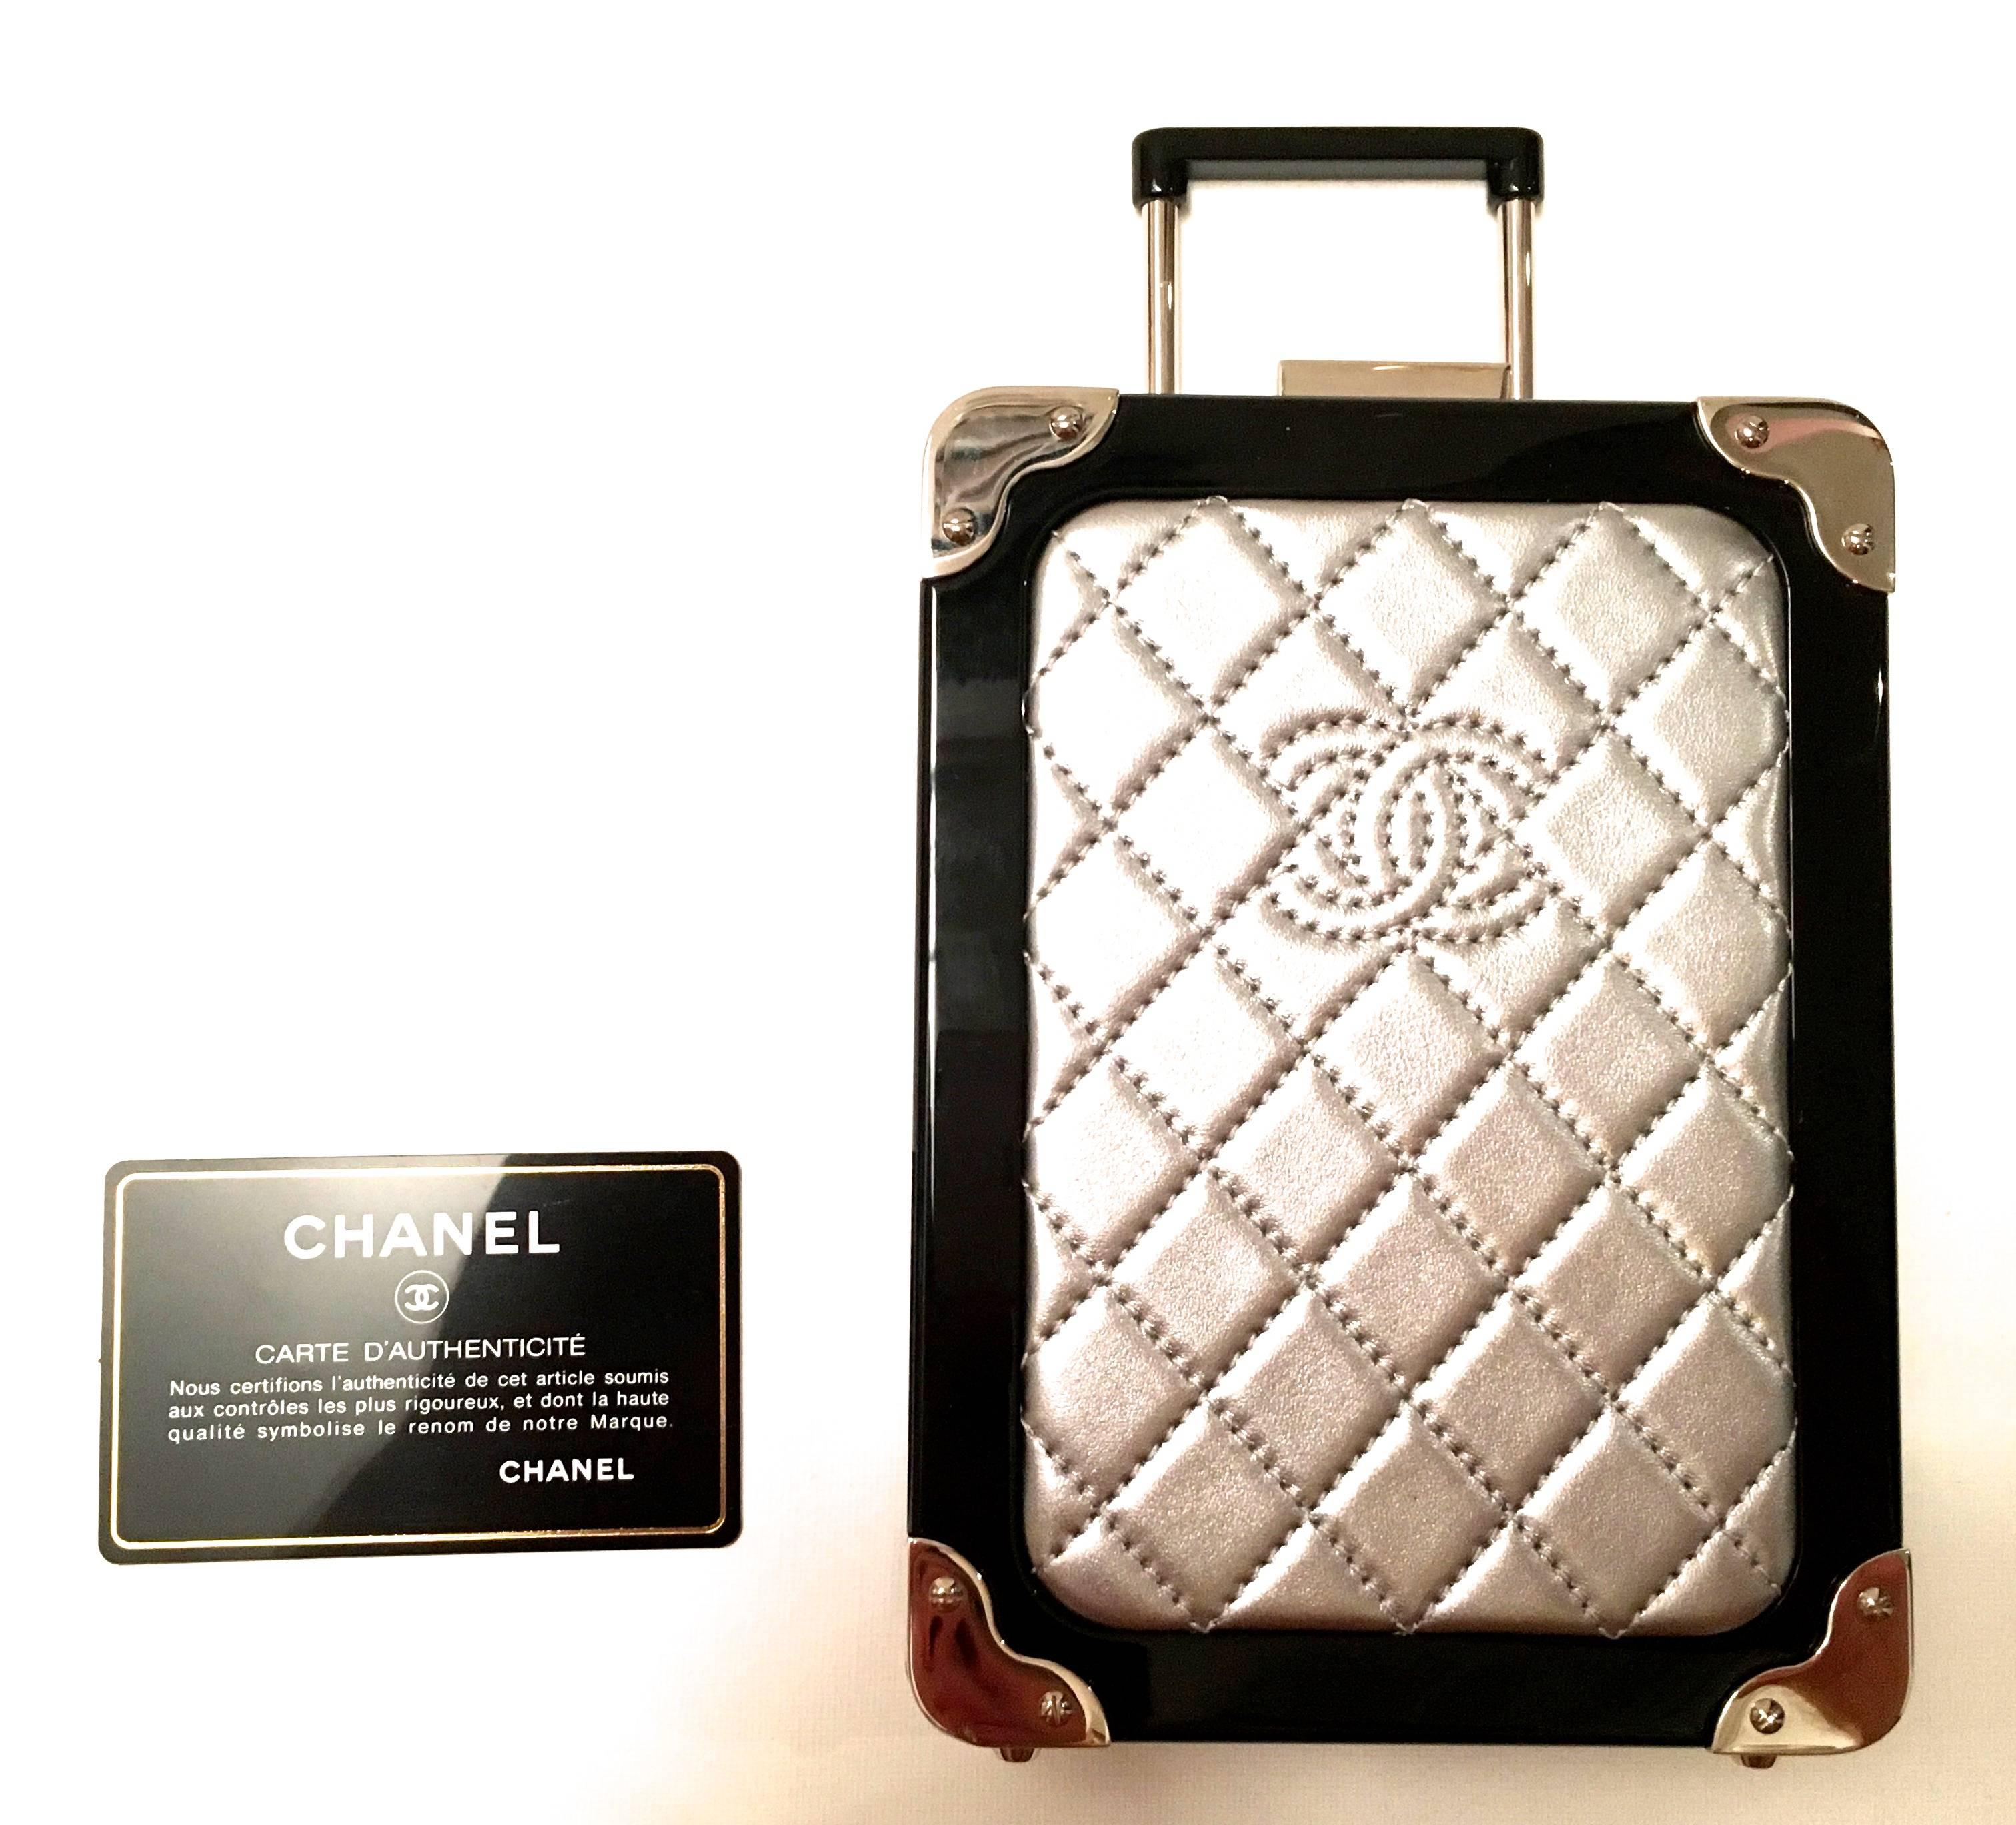 Presented here is an absolutely stunning runway purse from Chanel. Theclutch/purse is a mini version of a carry-on bag. There is a small retractable handle and small wheels just like a normal full-size carry-on piece of luggage. There is a shoulder